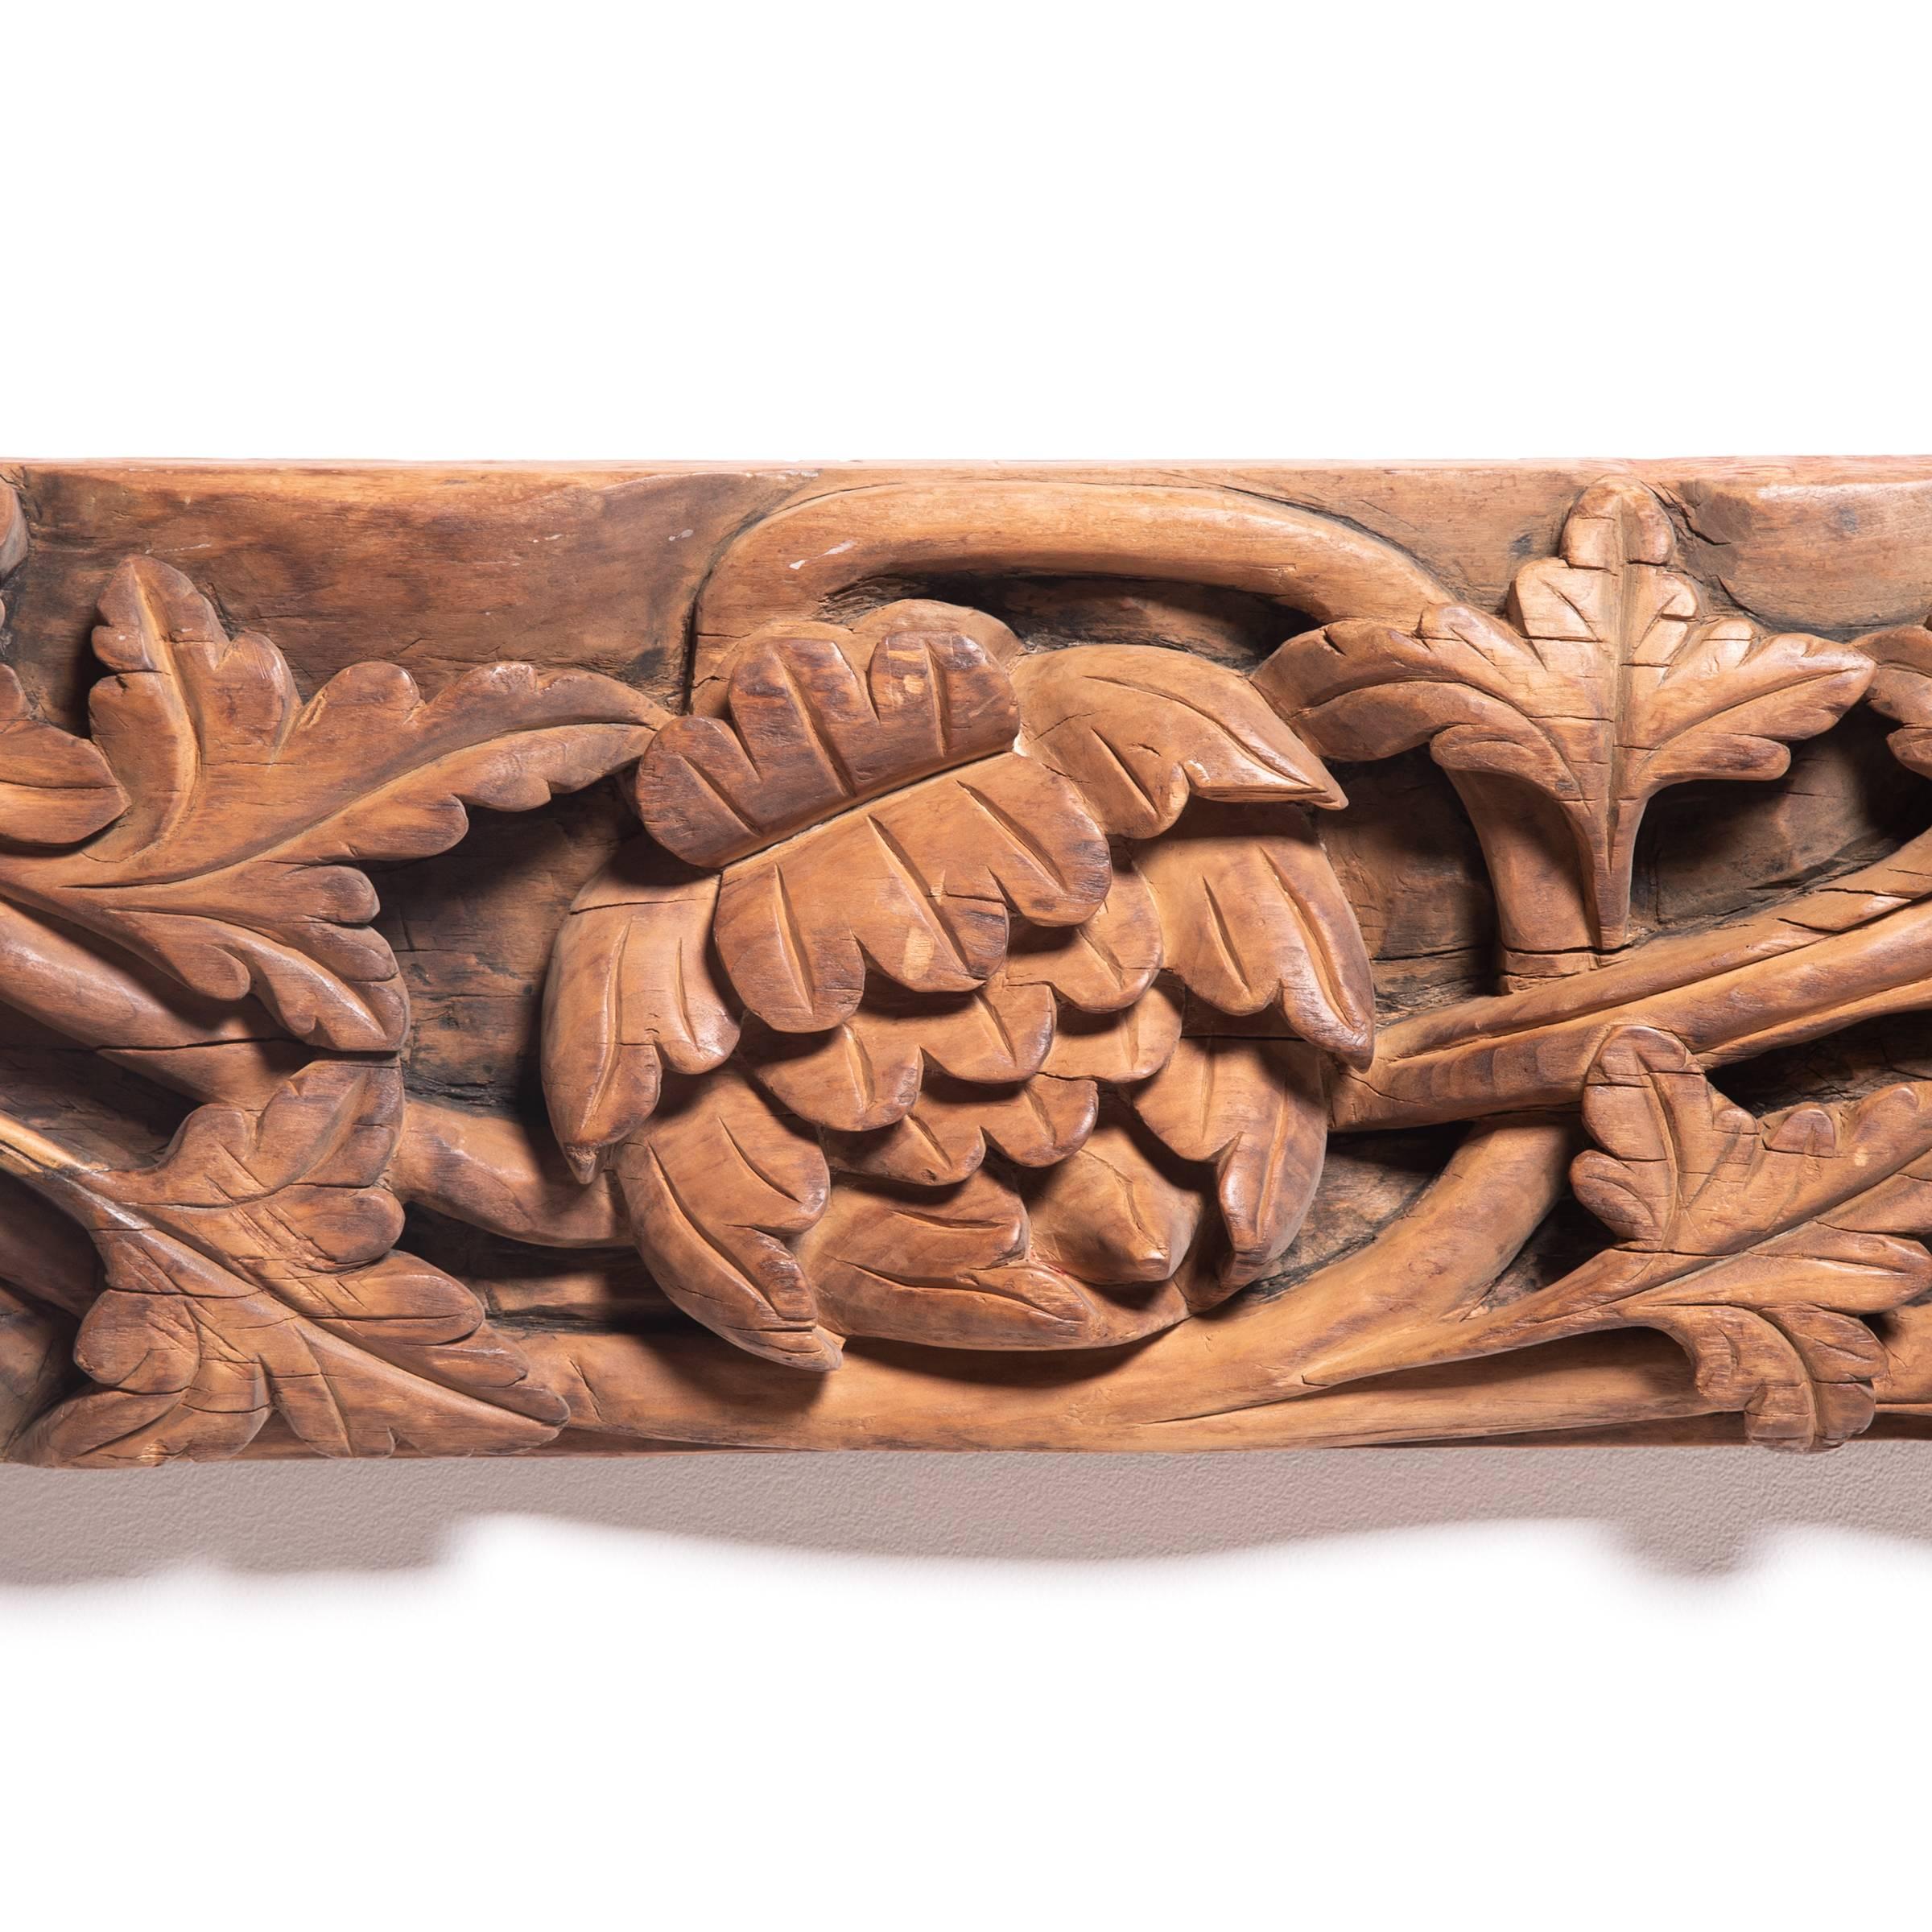 This architectural valance from the early 19th century is beautifully carved in low relief, with a meandering floral design outlined by striking, high-contrast shadows. The valance is adorned with trailing ivy and several peony blossoms, symbolizing